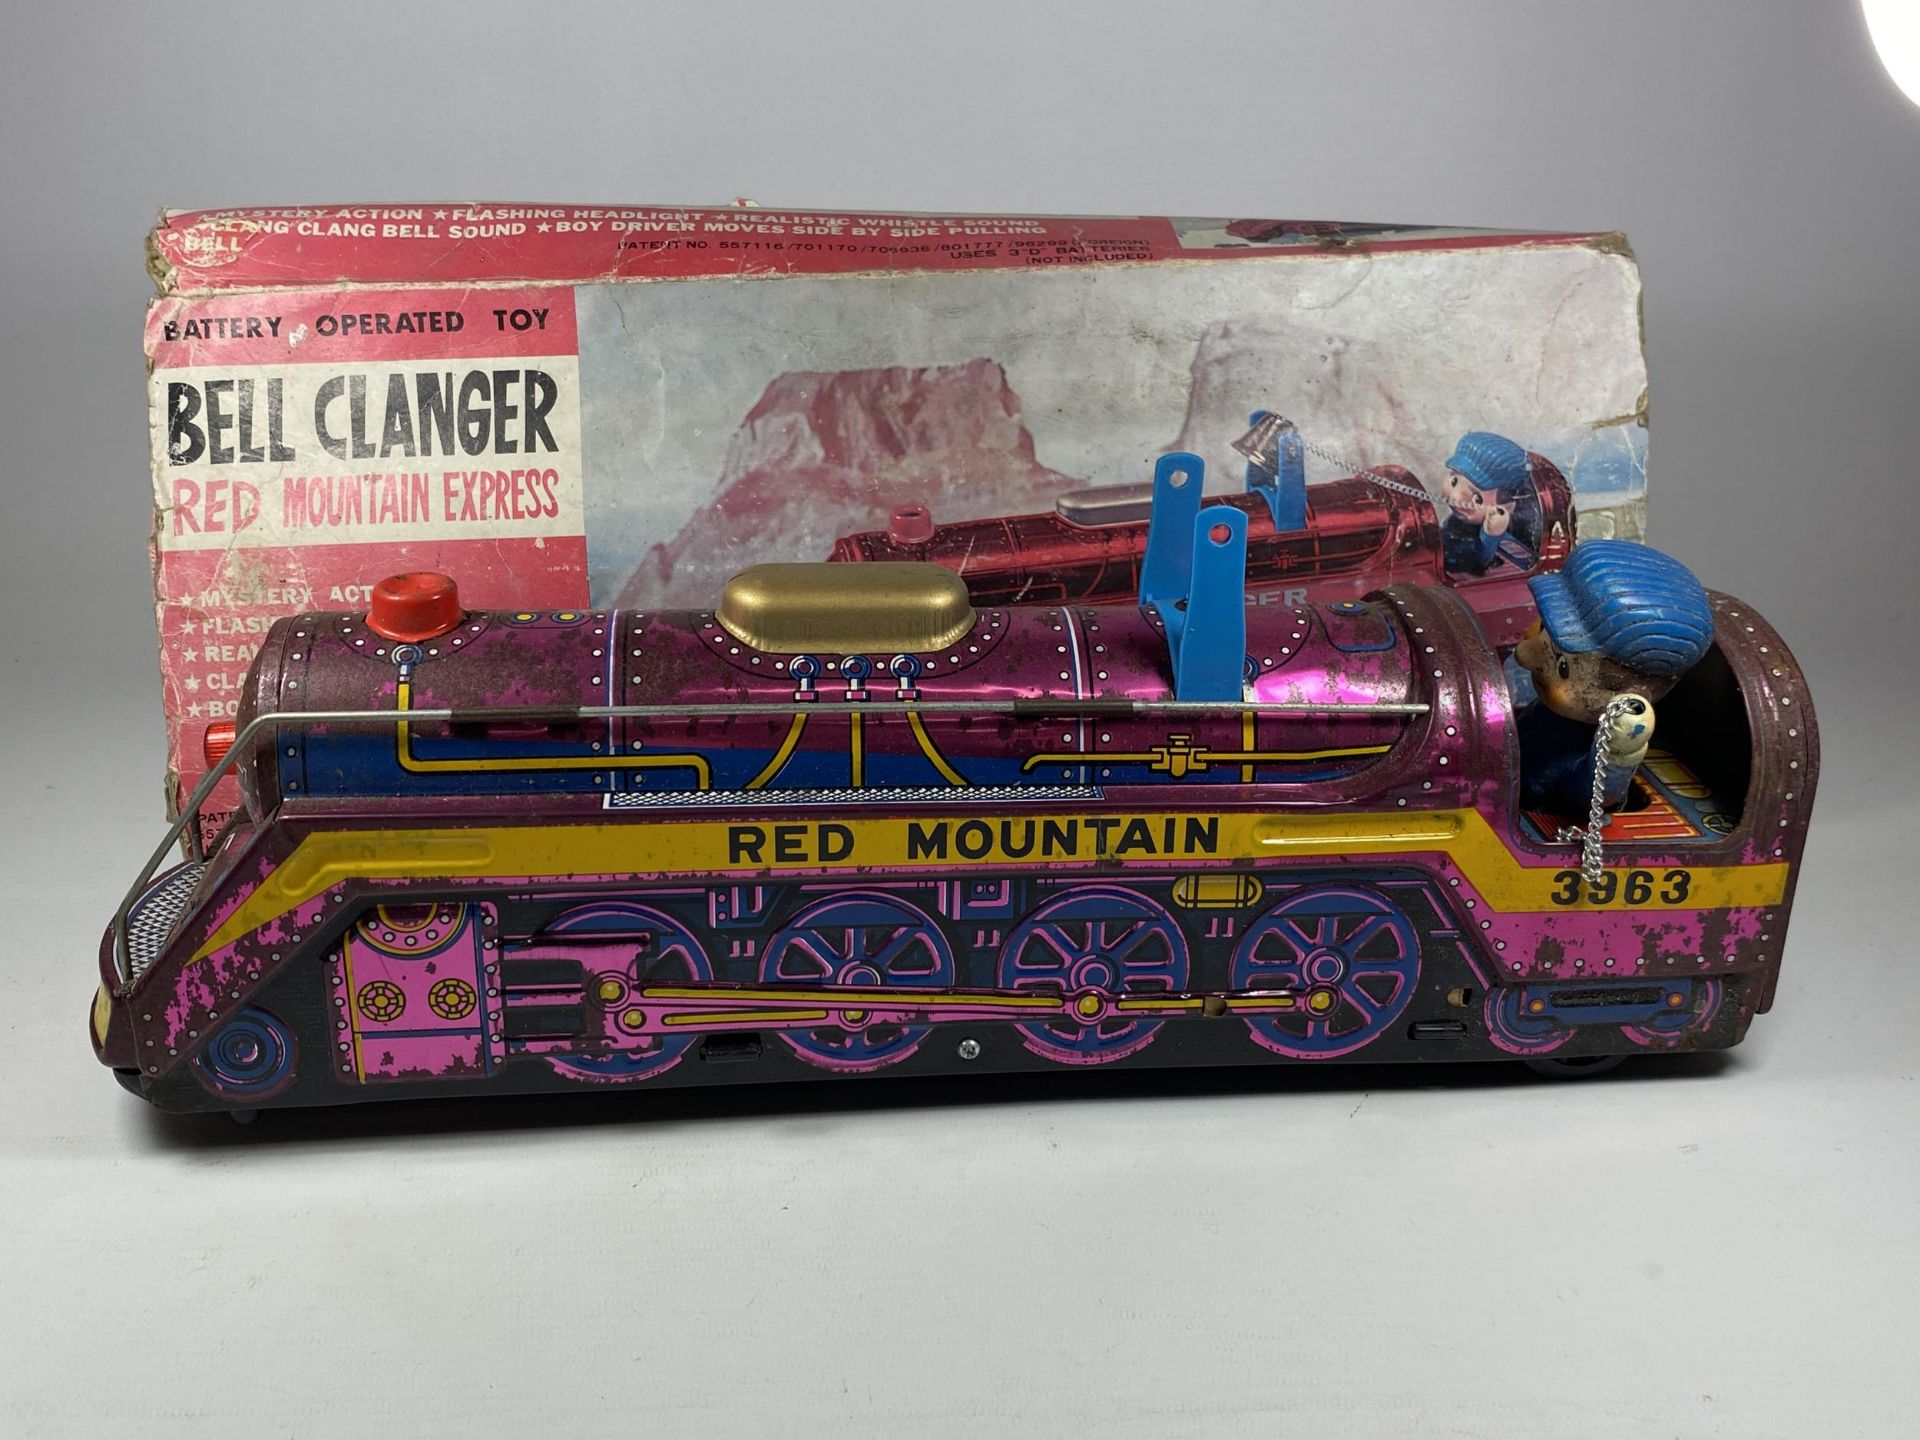 A BOXED BATTERY OPERATED TIN RED MOUNTAIN EXPRESS BELL CLANGER TRAIN